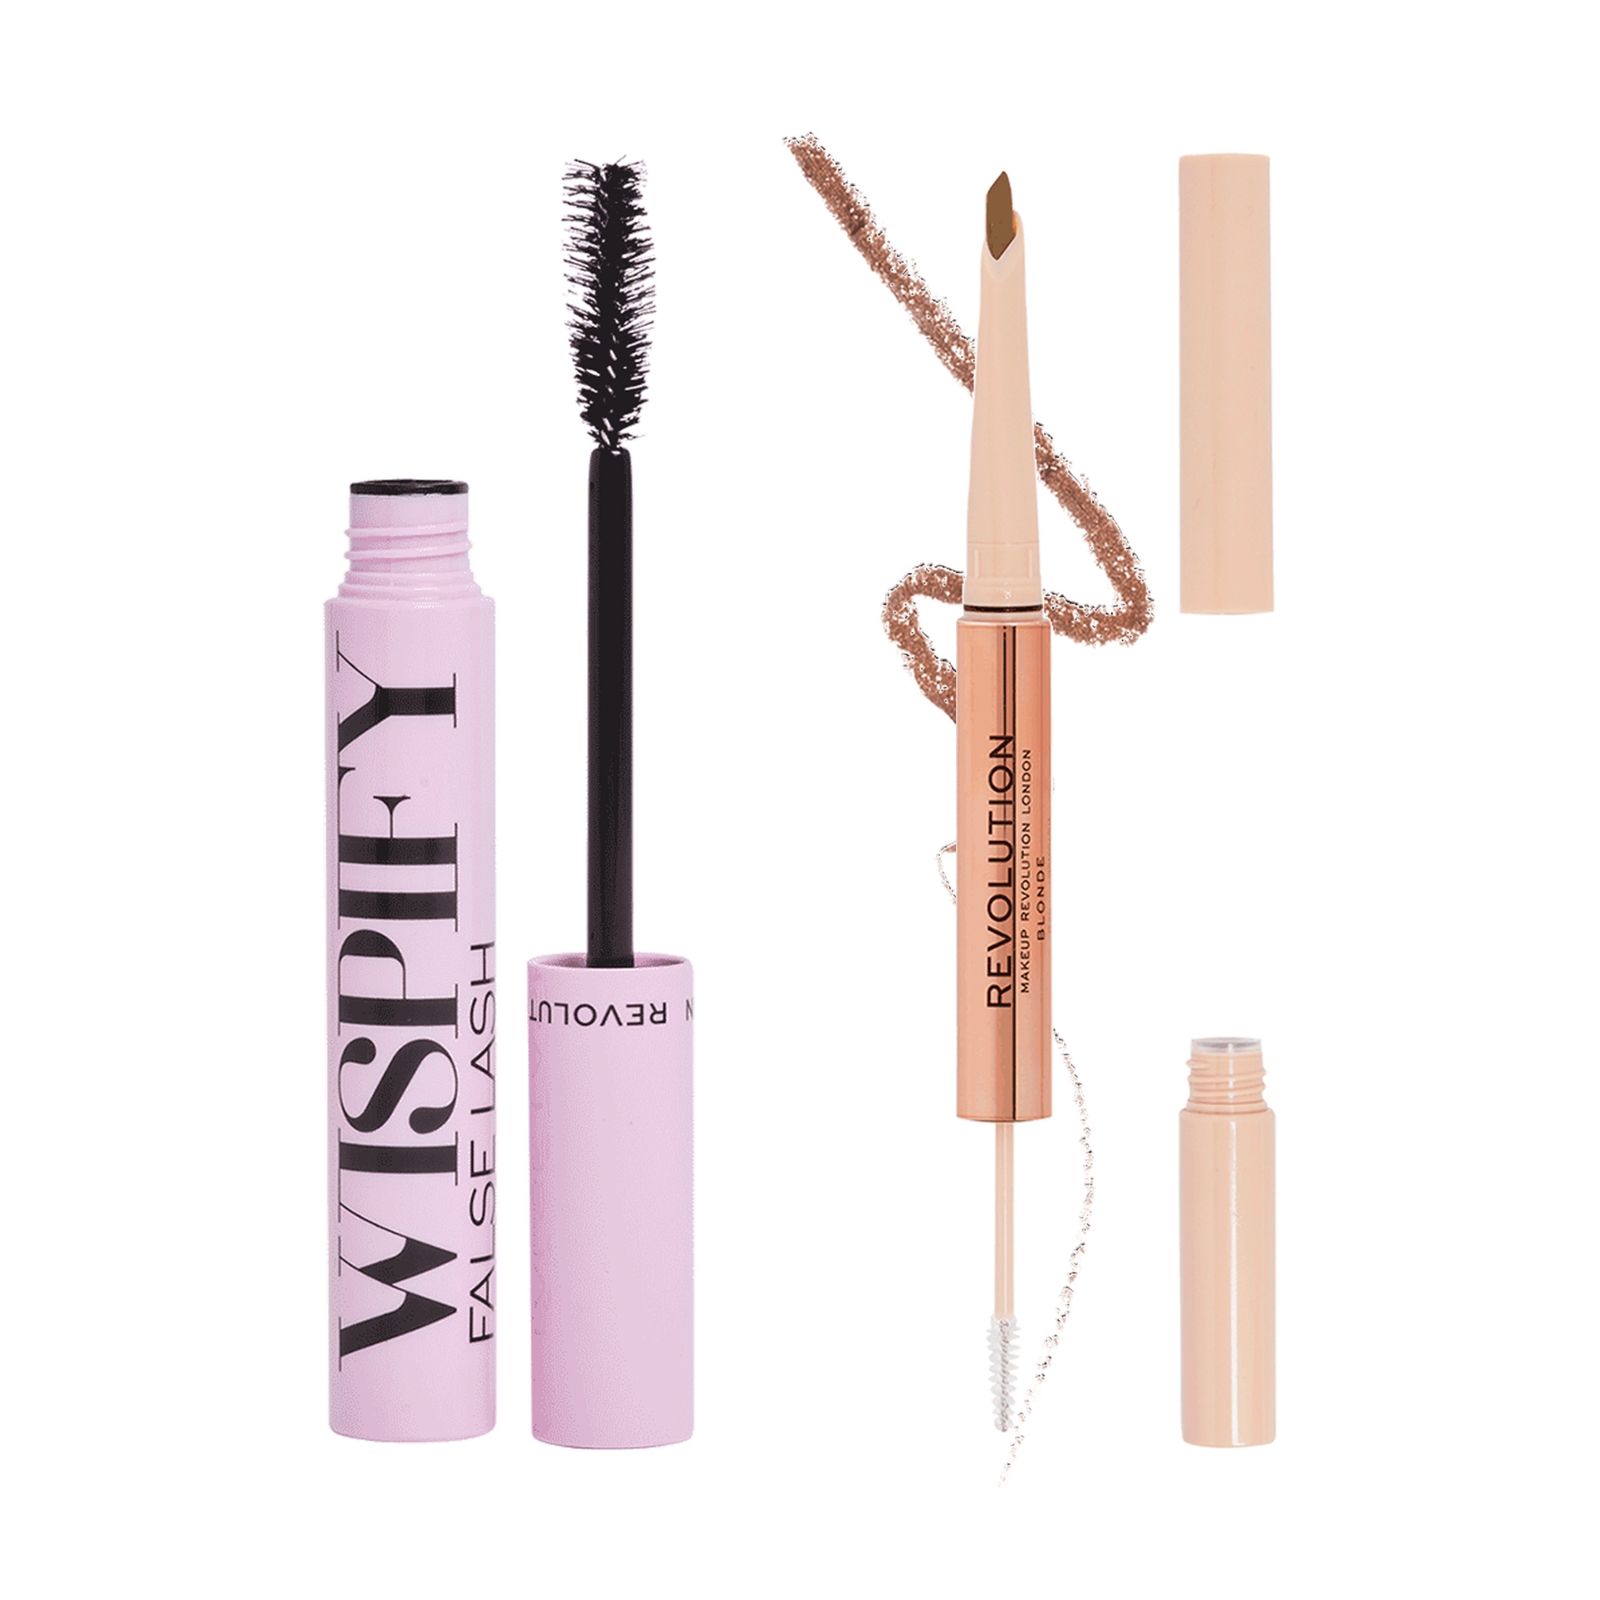 Revolution Wispify and Fluffy Brow Bundle (Various Shades) - Blonde